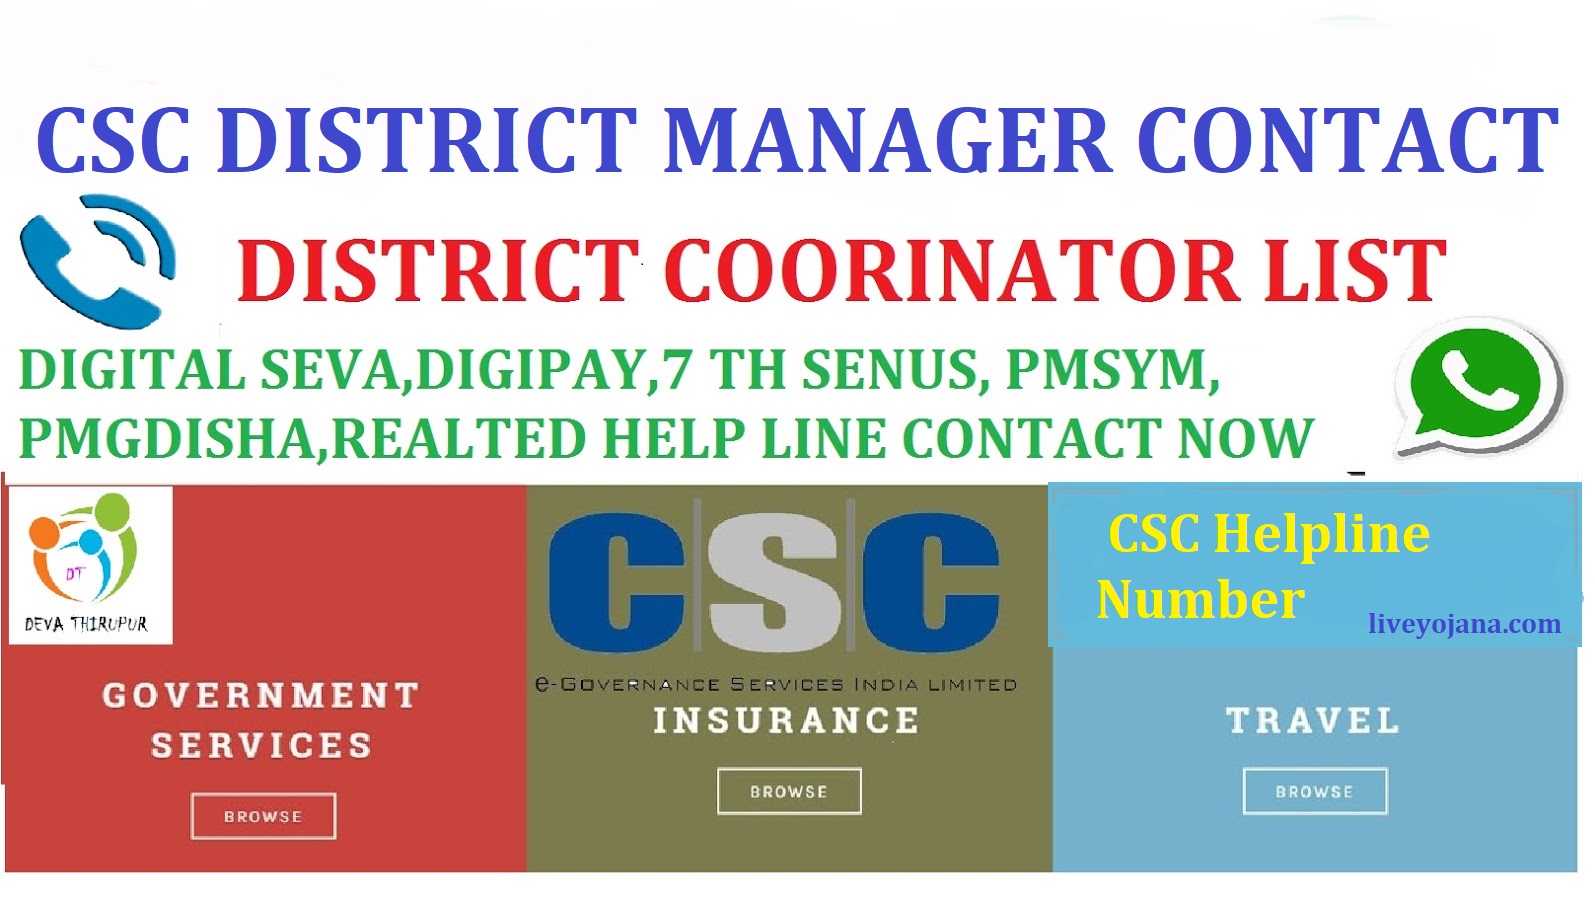 CSC District Manager Contact Number, CSC Helpline-योजना की सेवा